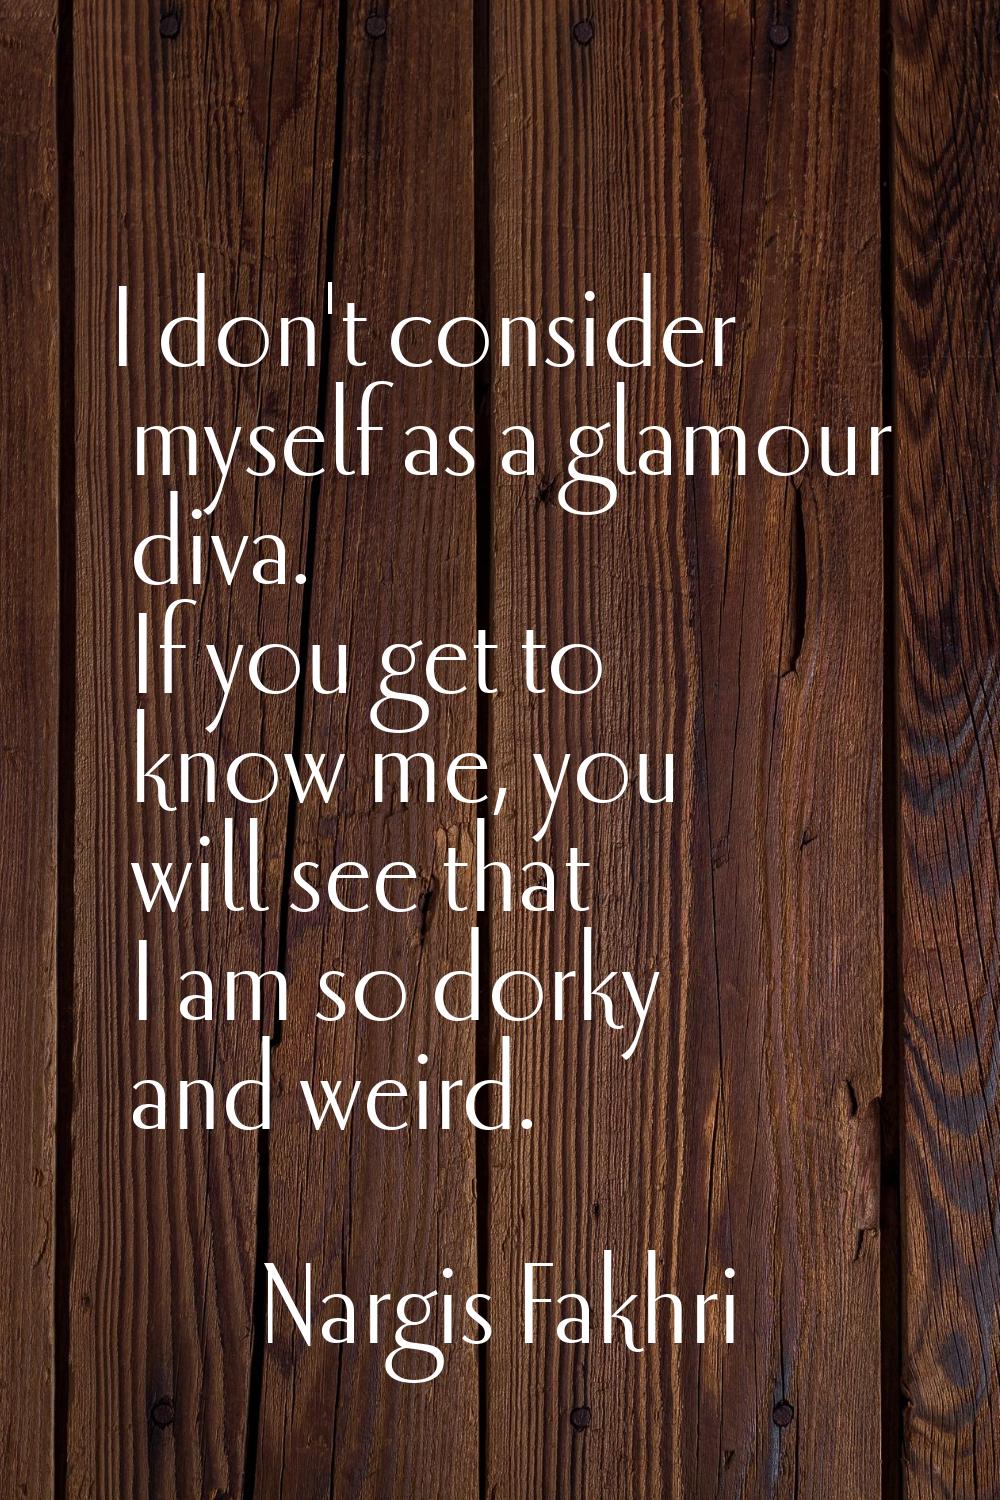 I don't consider myself as a glamour diva. If you get to know me, you will see that I am so dorky a